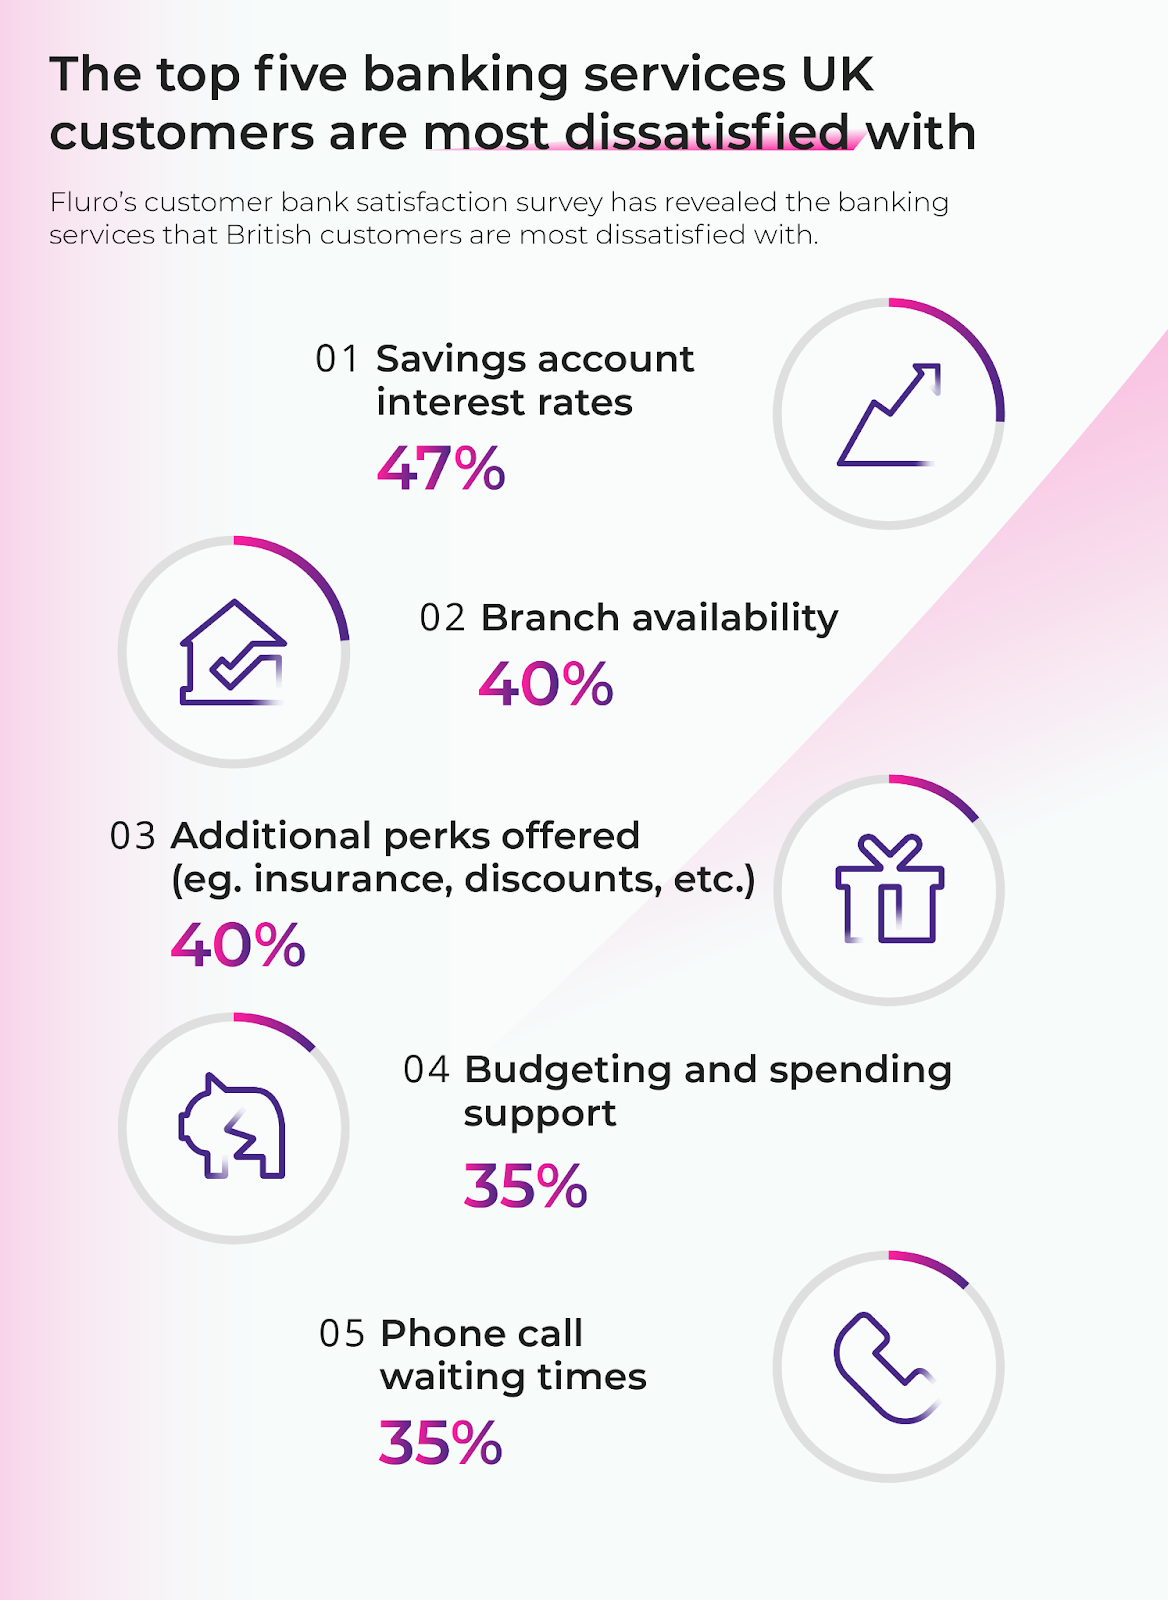 The top five banking services UK customers are most dissatisfied with